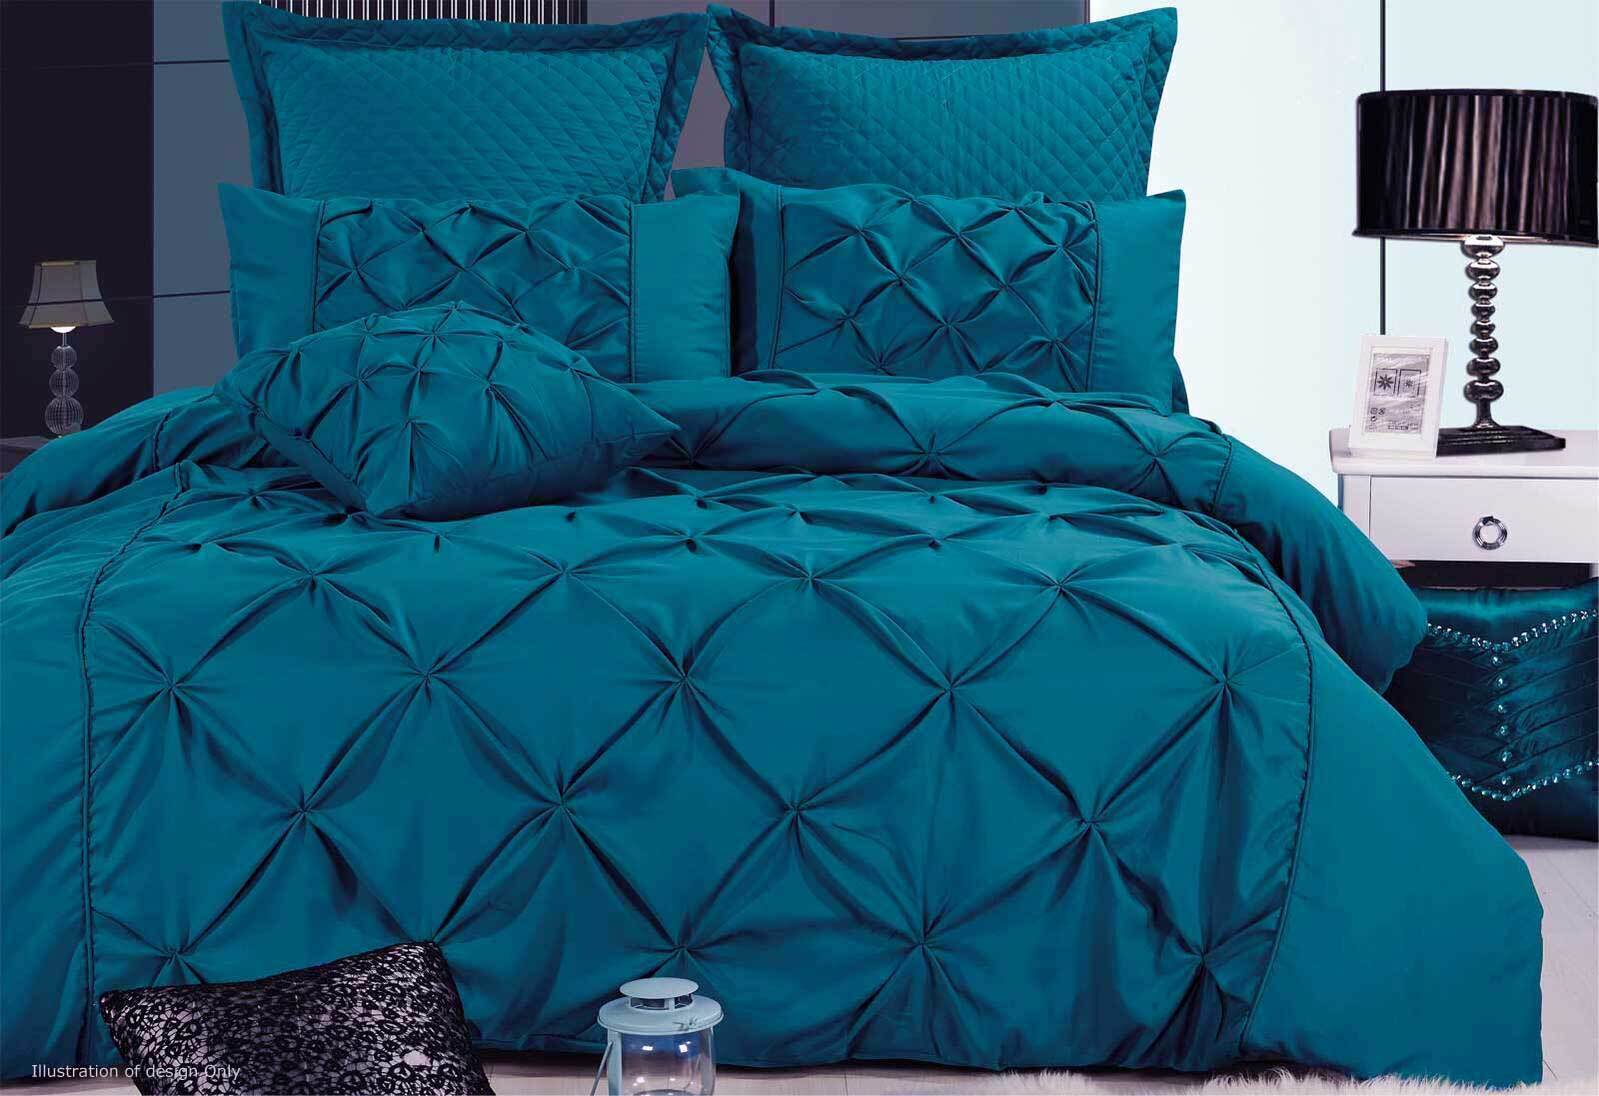 Luxton Fantine Teal Blue Quilt Cover, Teal Duvet Cover King